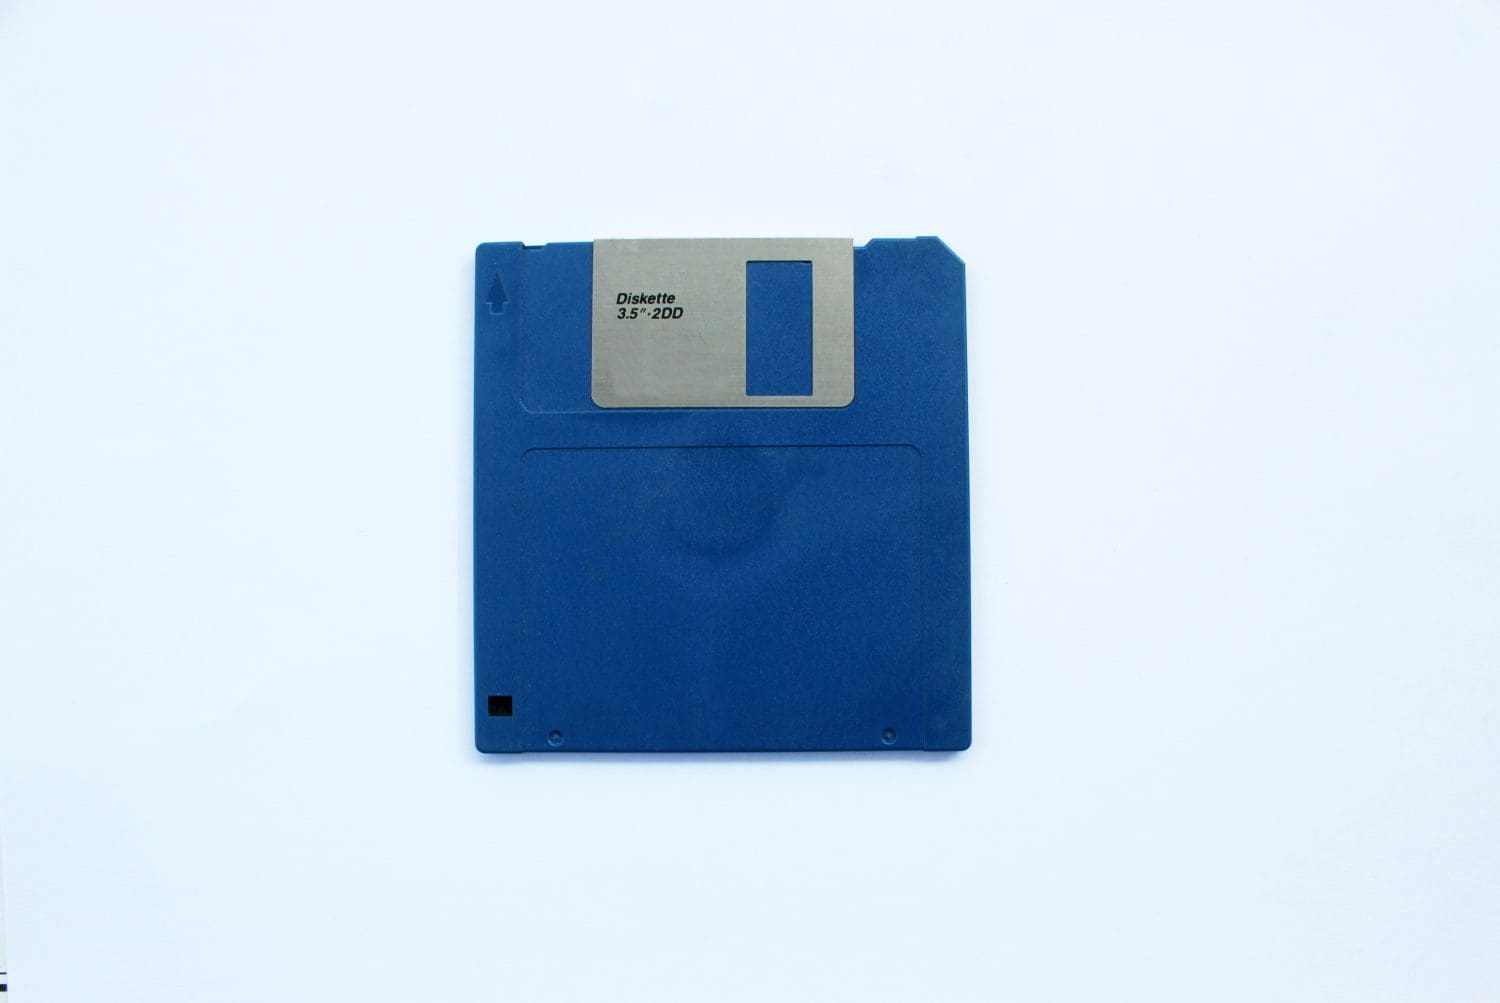 Blue diskette isolated on white background SHOTLIST1990